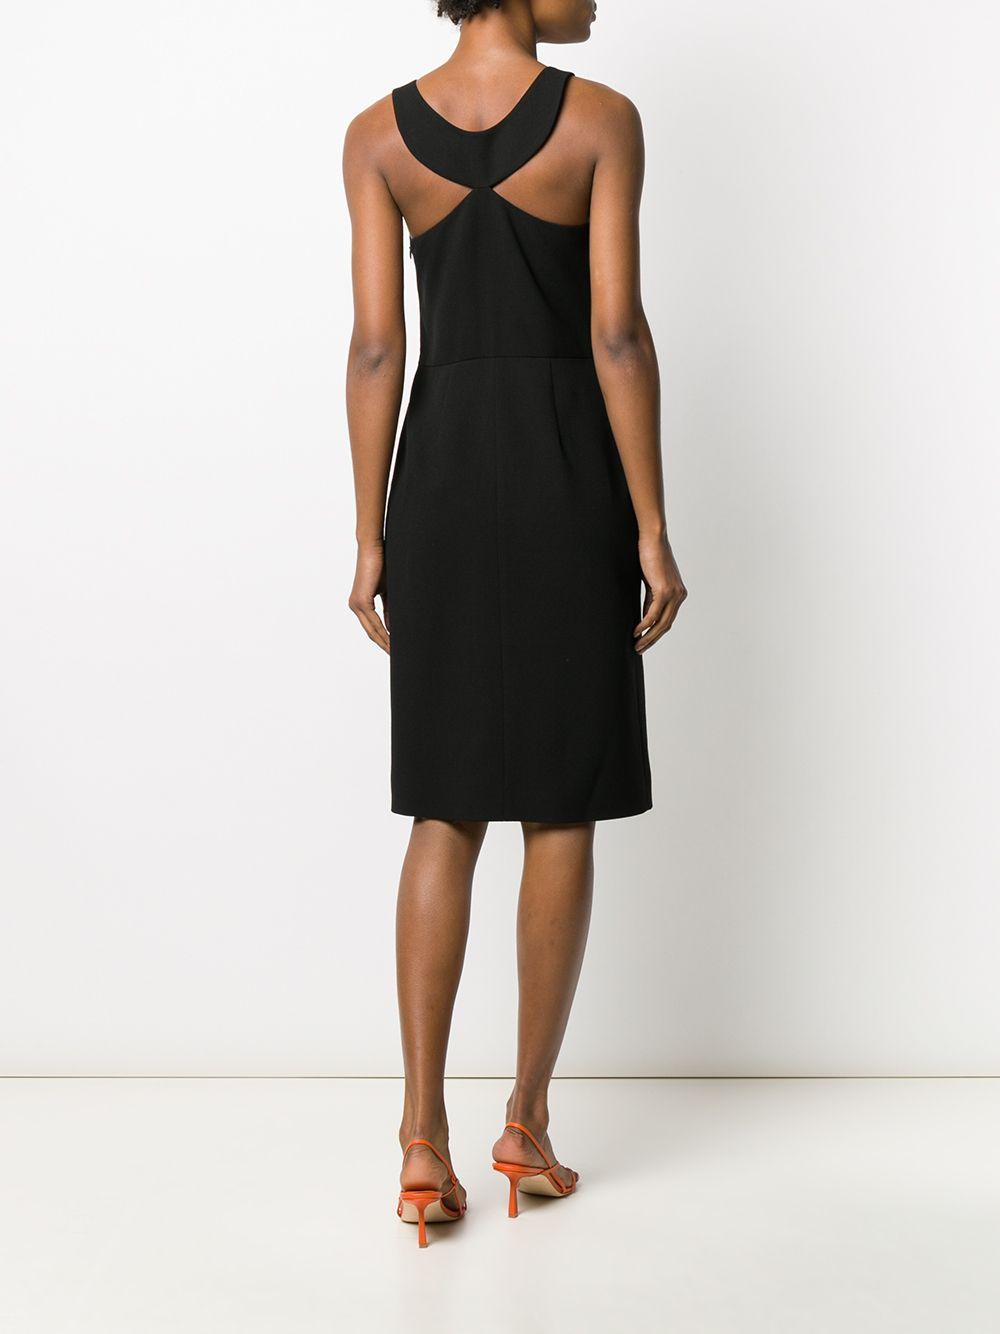 Givenchy Wool Graphic Neck Dress in Black - Save 55% - Lyst